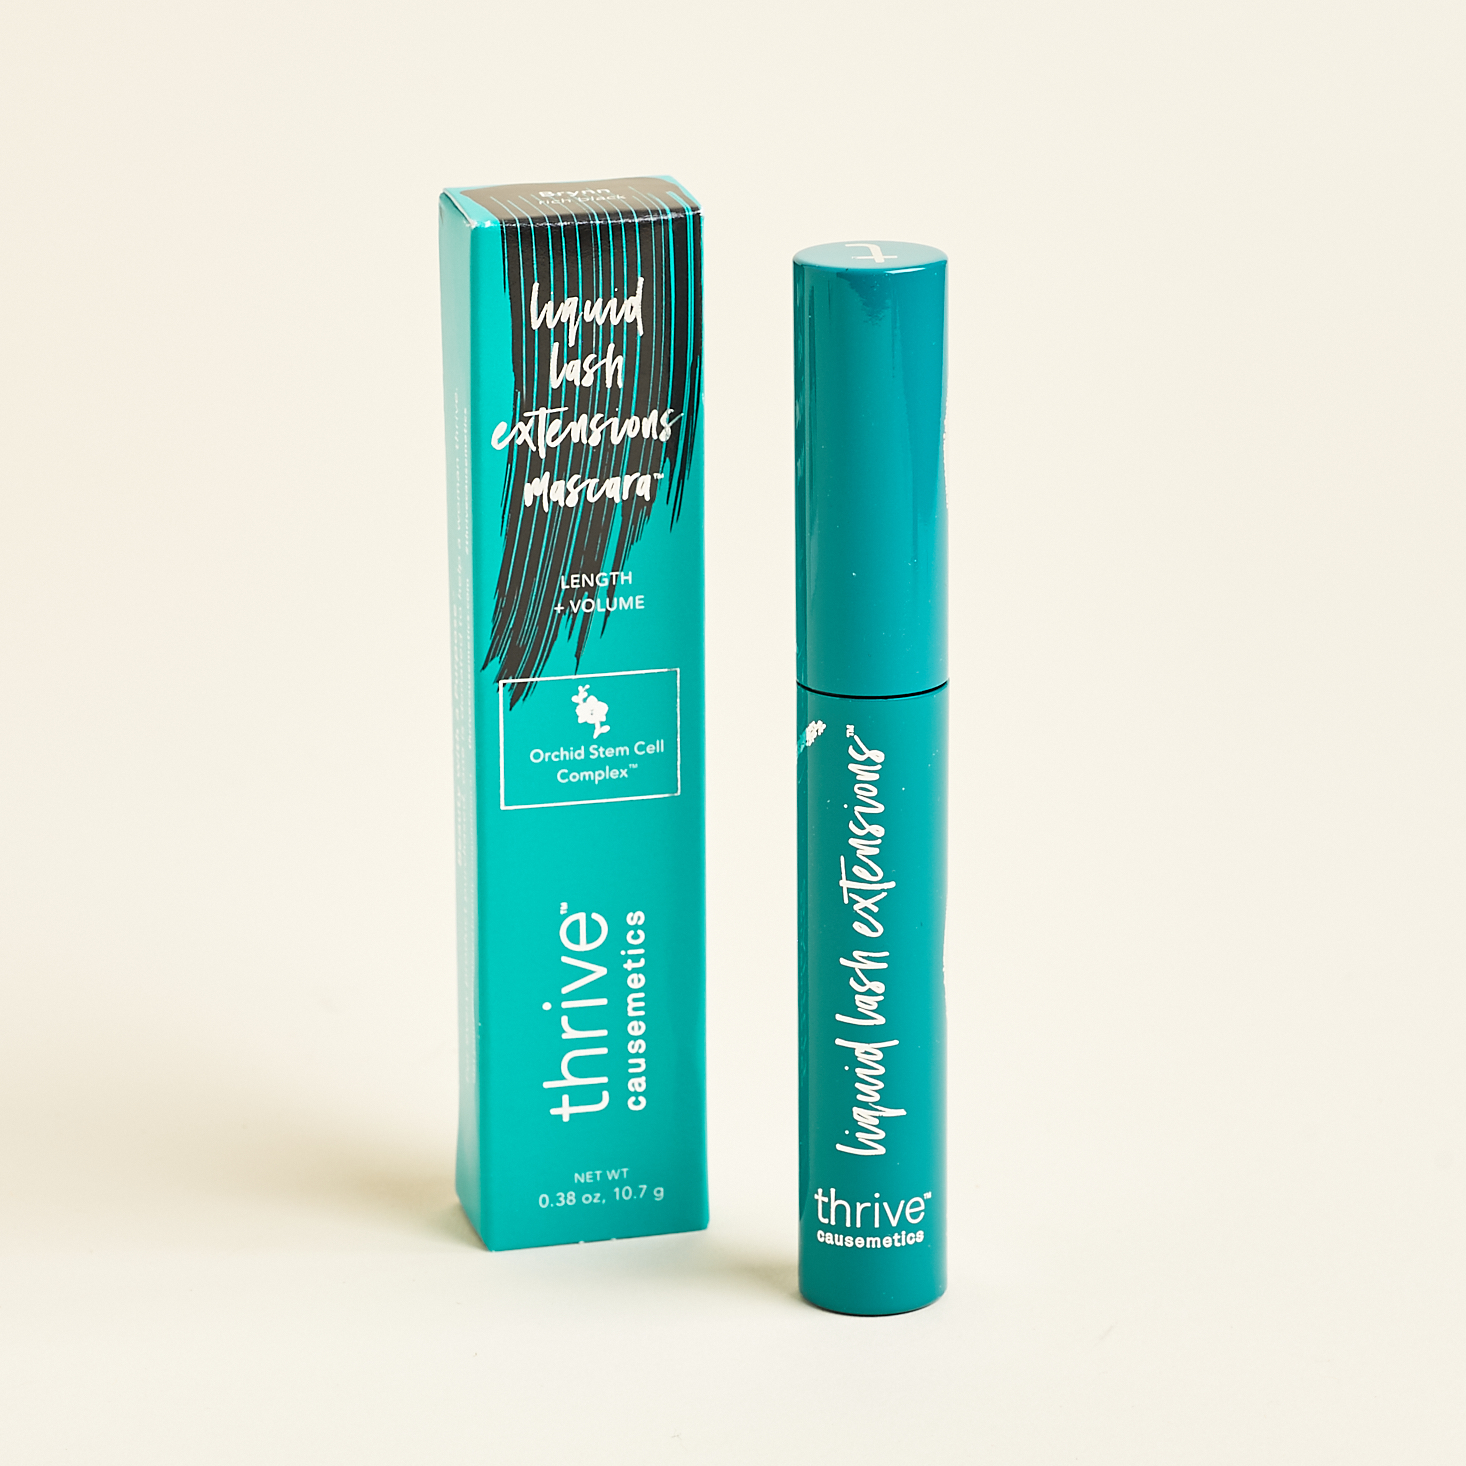 teal tube of mascara with teal box